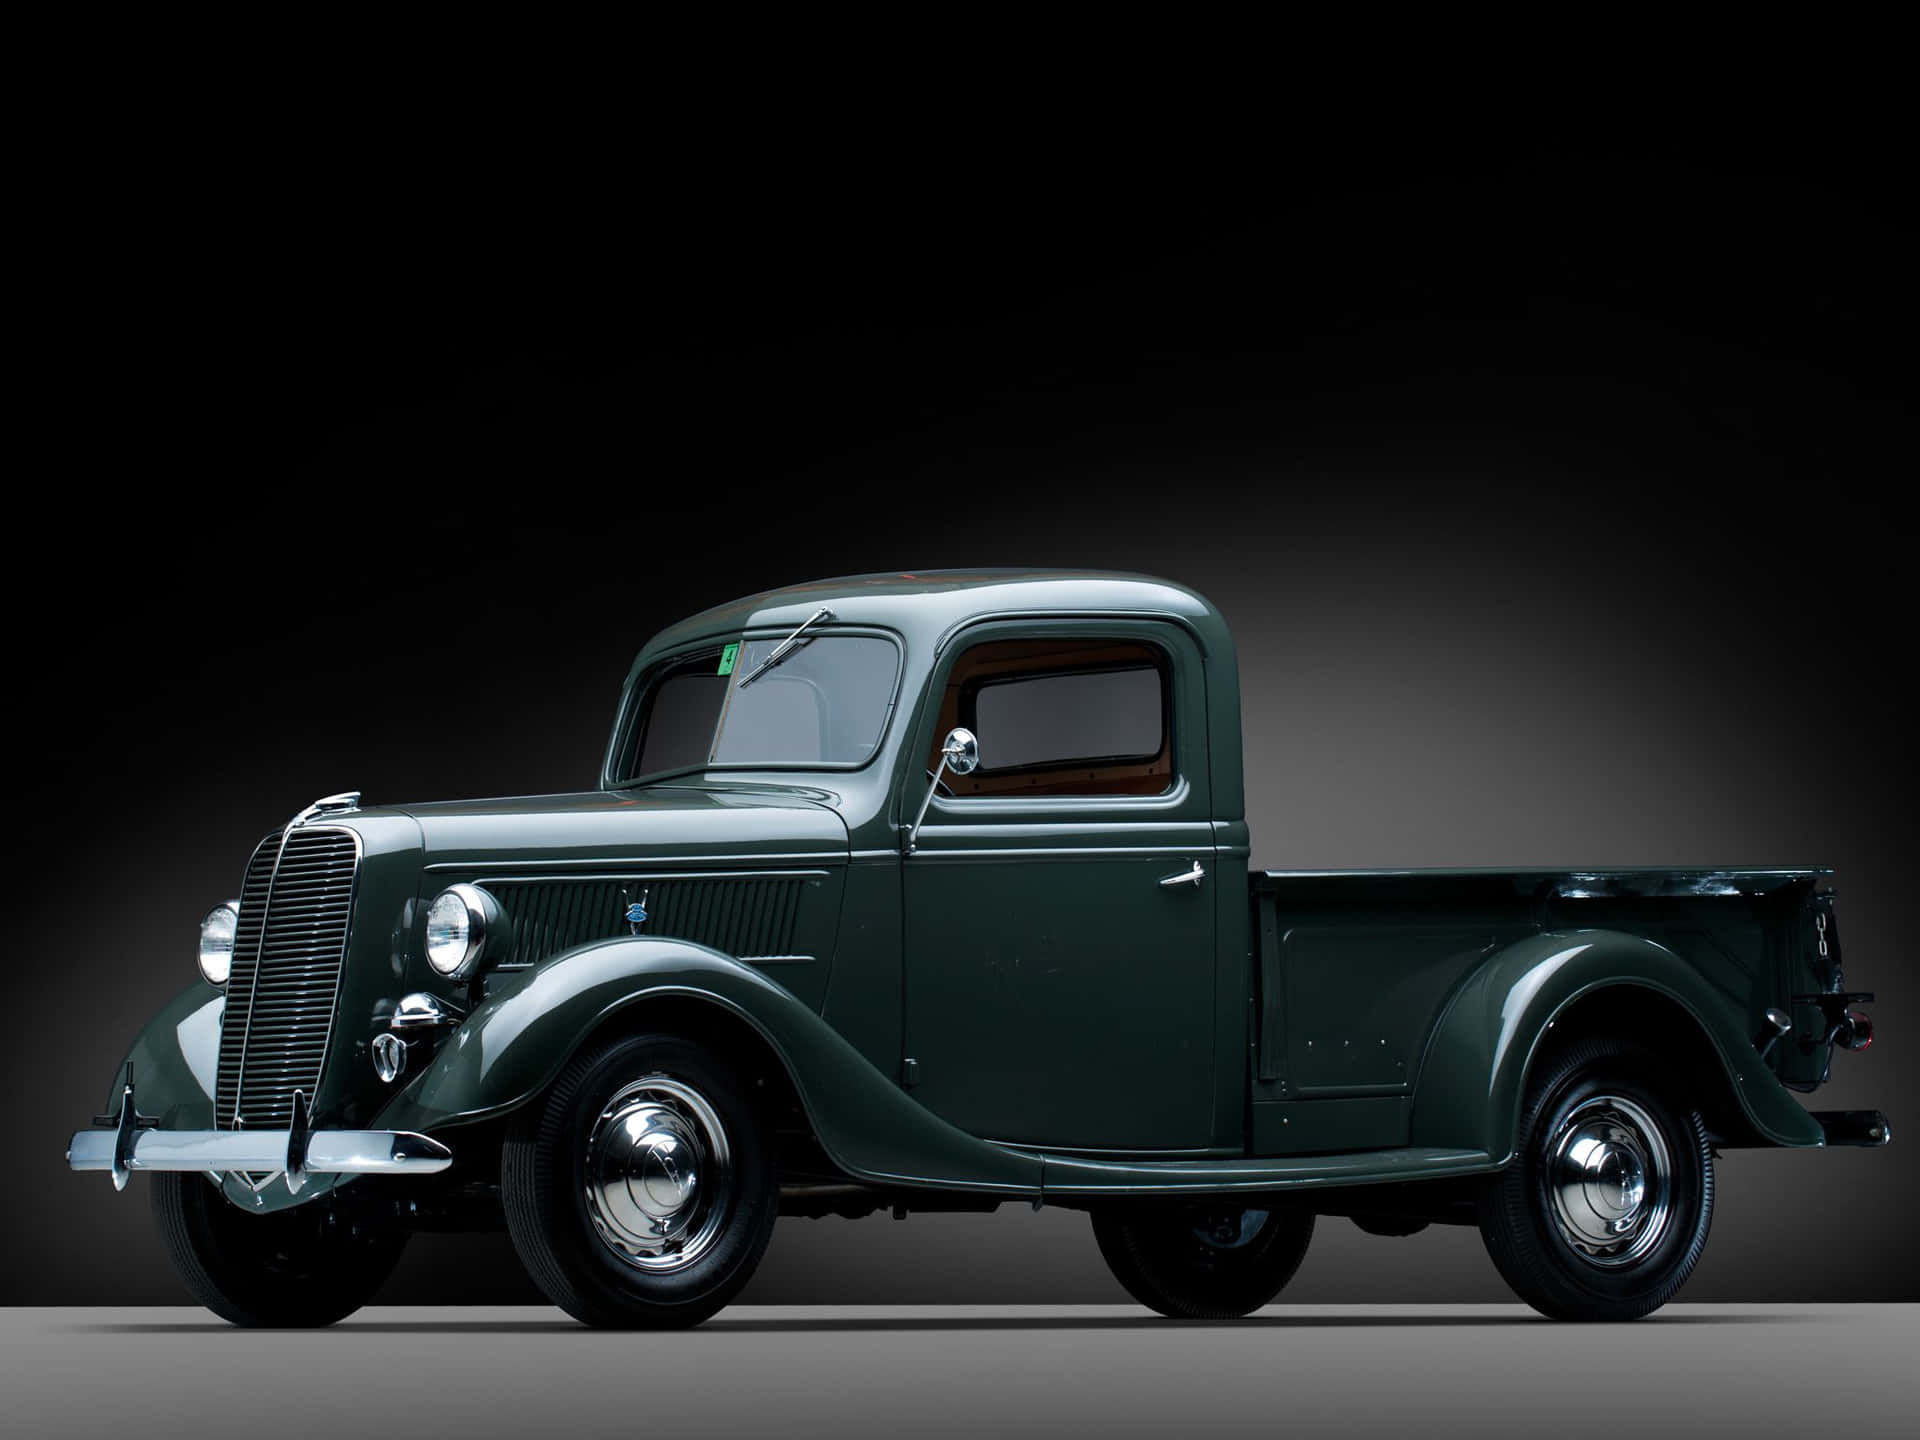 The Classic American Ford Pickup Truck